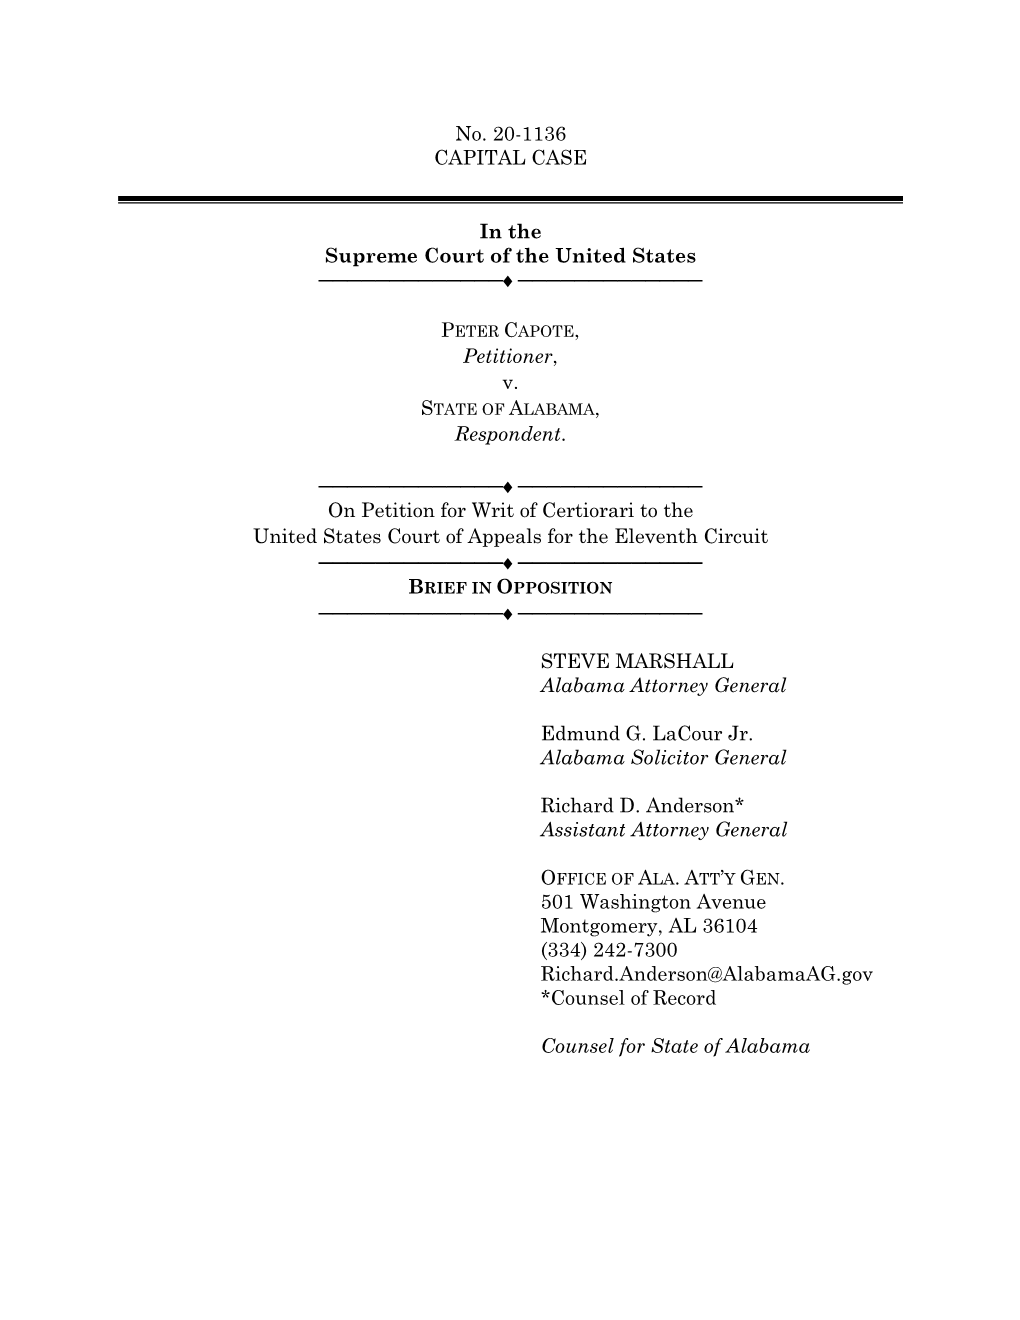 No. 20-1136 CAPITAL CASE in the Supreme Court of the United States